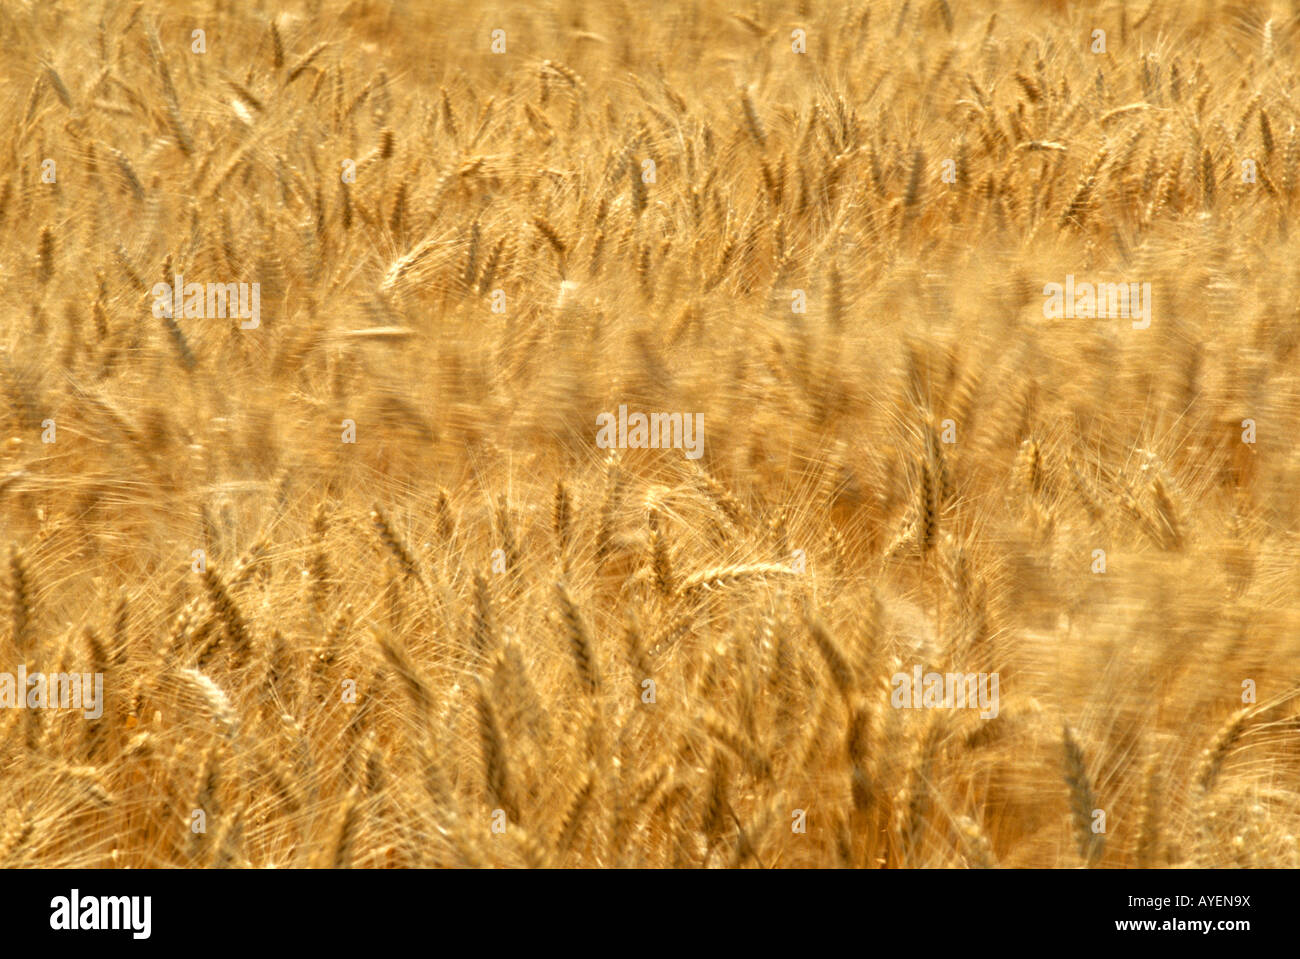 Close up view of a ripe golden wheat field blowing in the wind Stock Photo